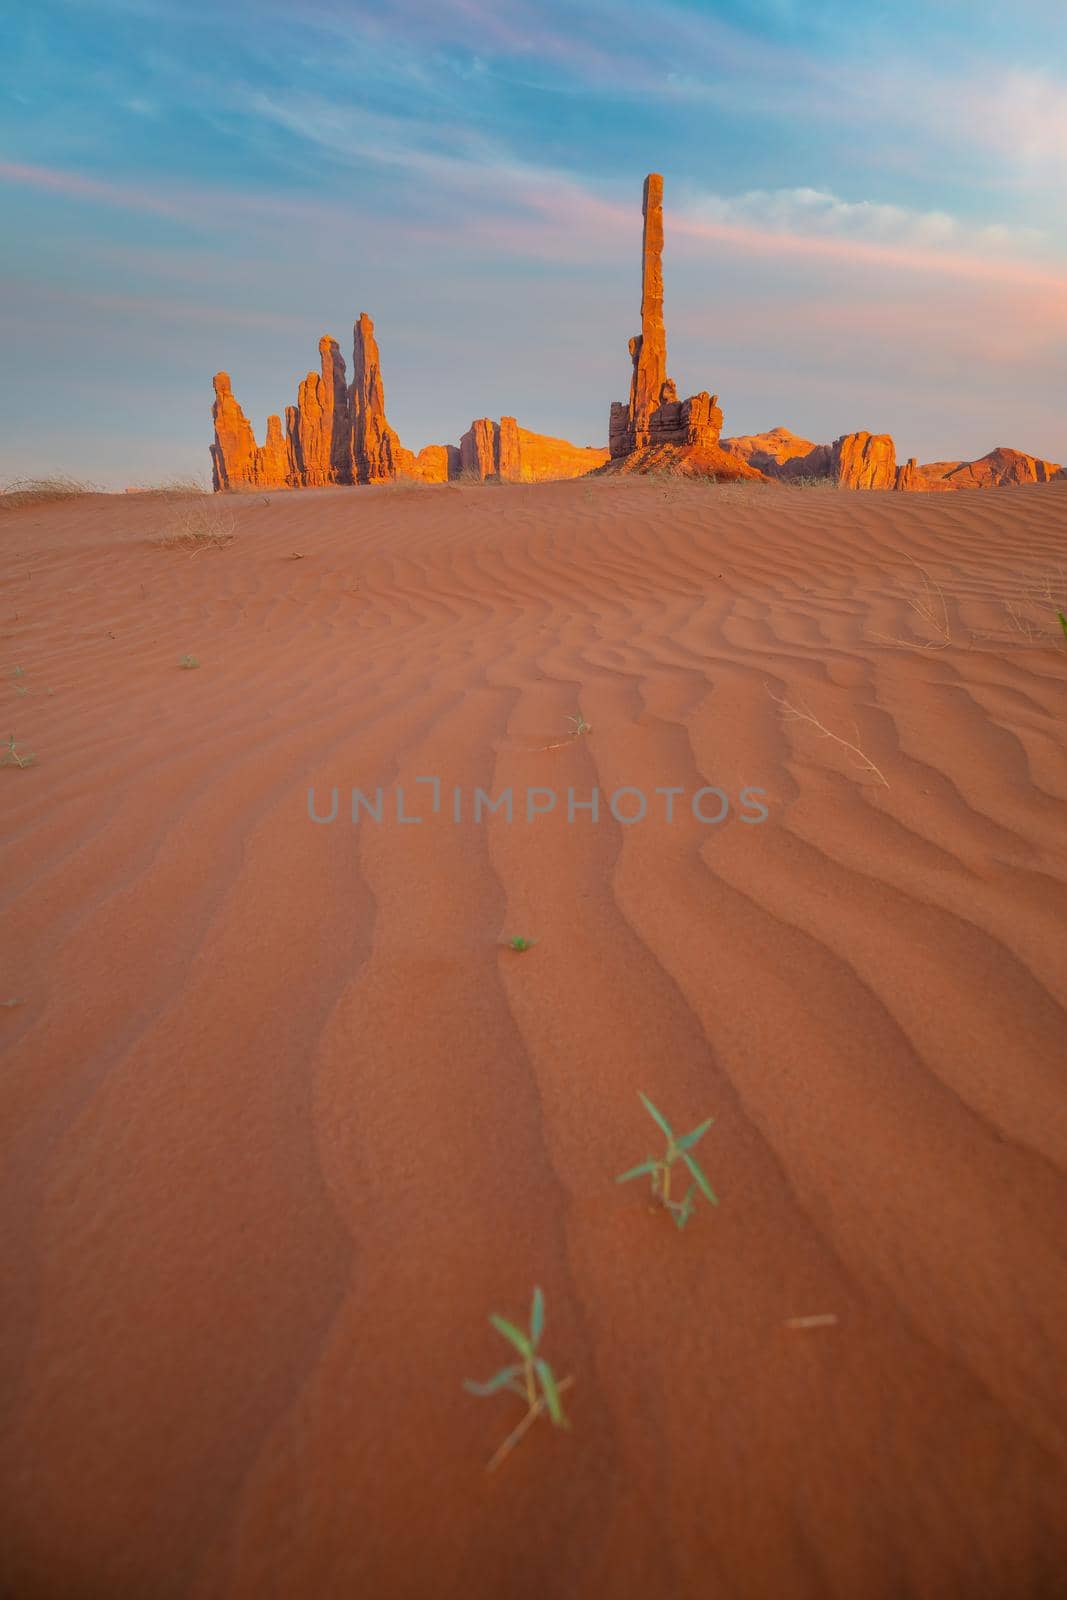 Totem pole and sand dunes  in Monument Valley, Arizona USA at sunset